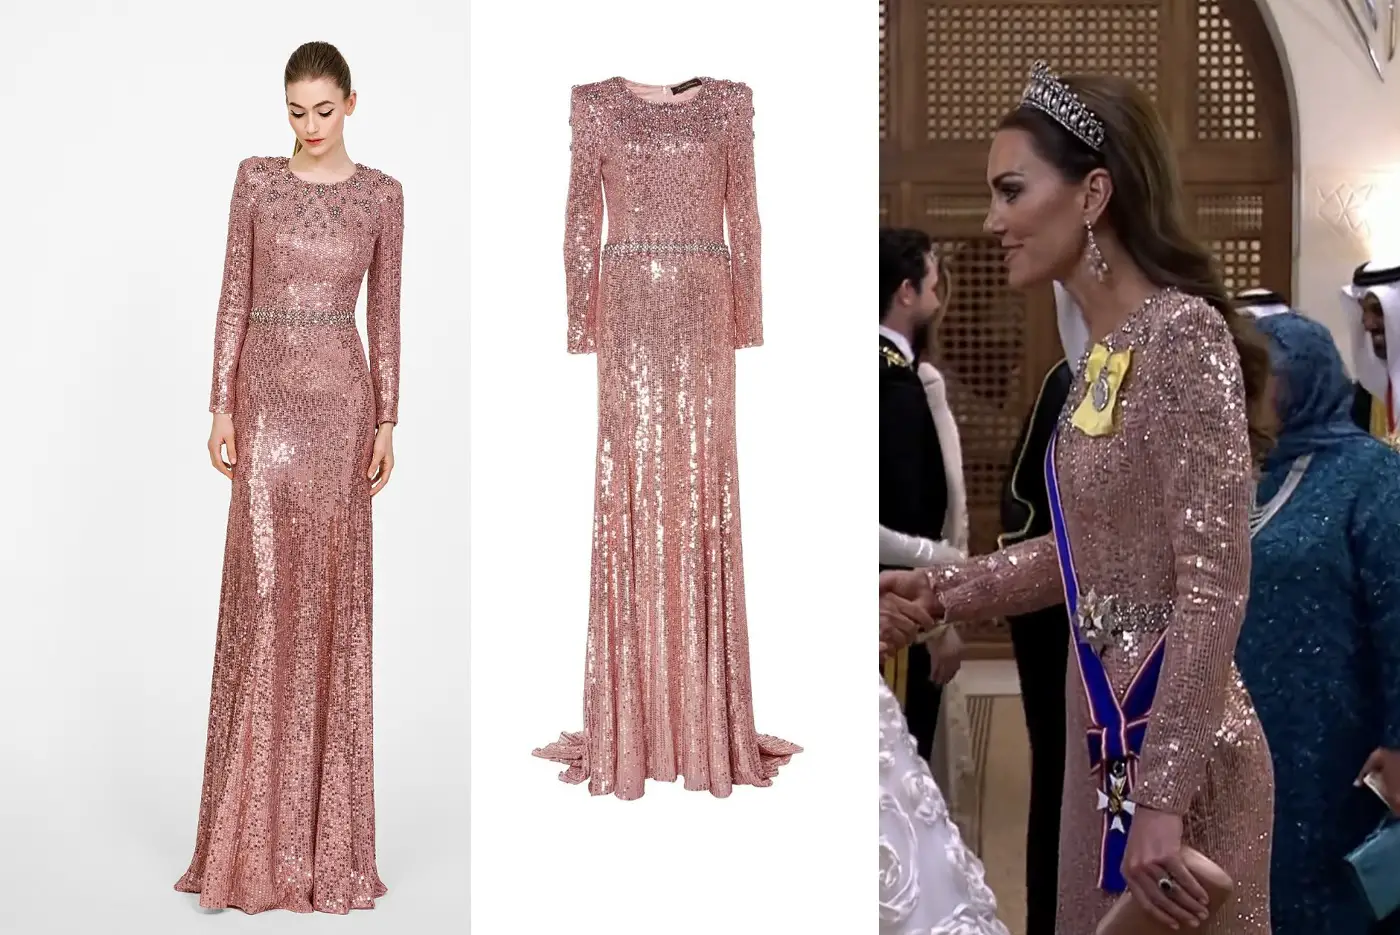 The Princess of Wales wore Jenny Packham Georgia Gown in Pink